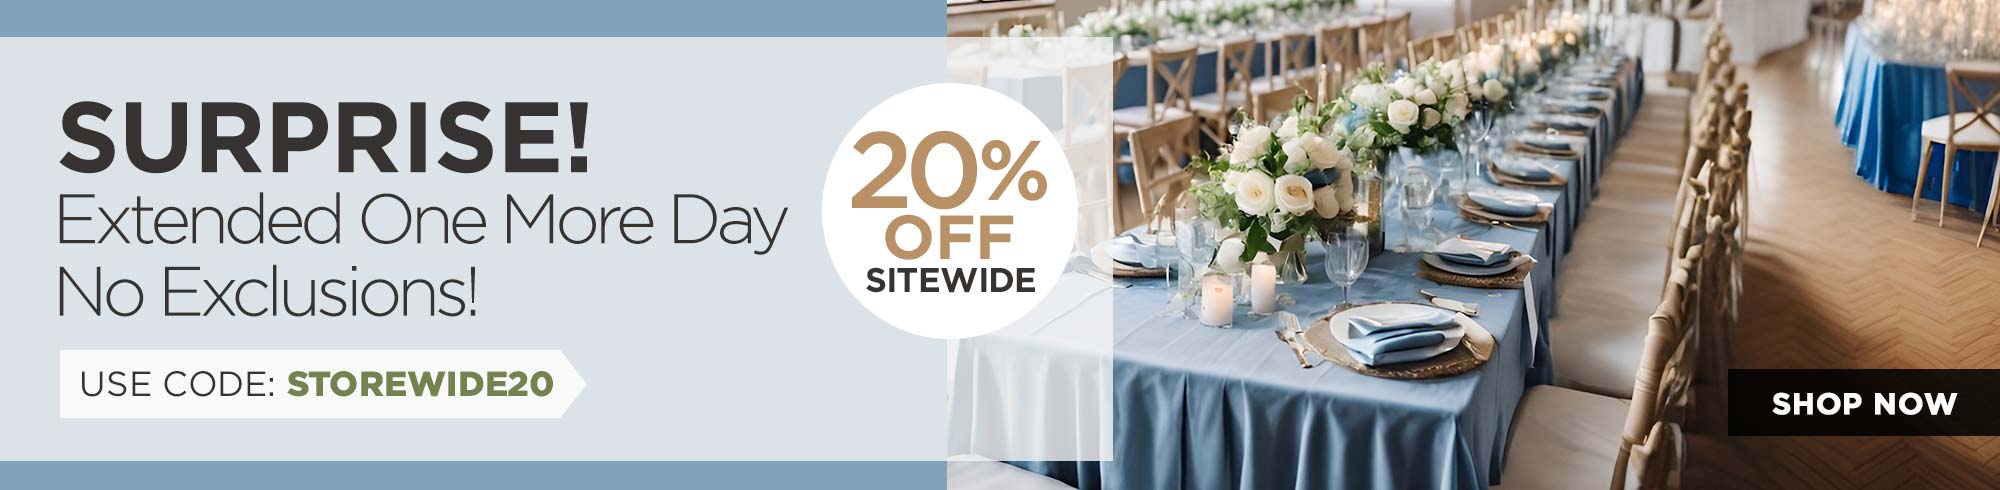 Surprise! 20% OFF Sitewide Extended One More Day- No Exclusions!